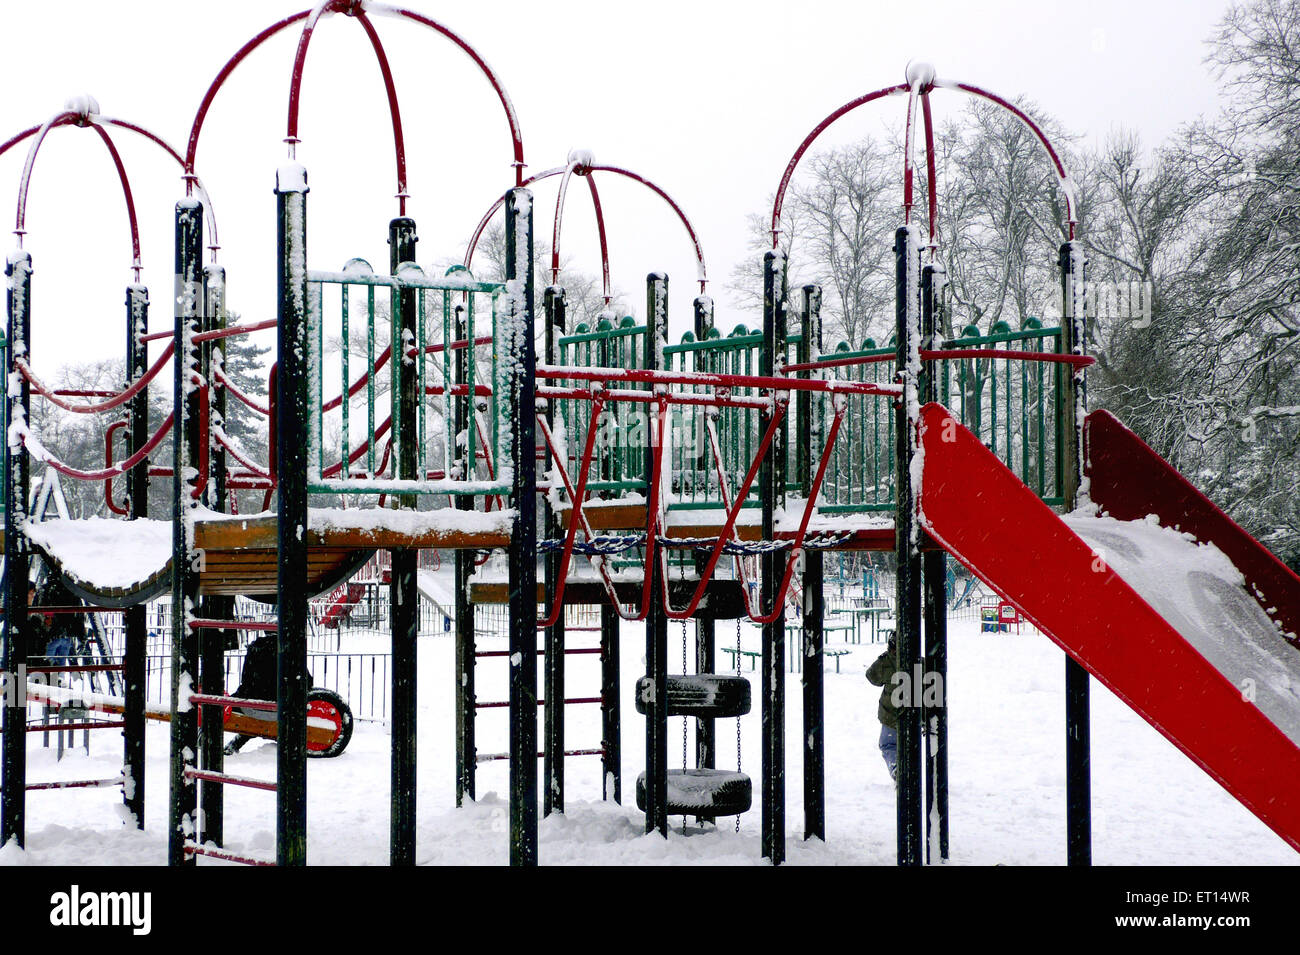 Snowstorm covering playground in park ; London ; UK United Kingdom England Stock Photo